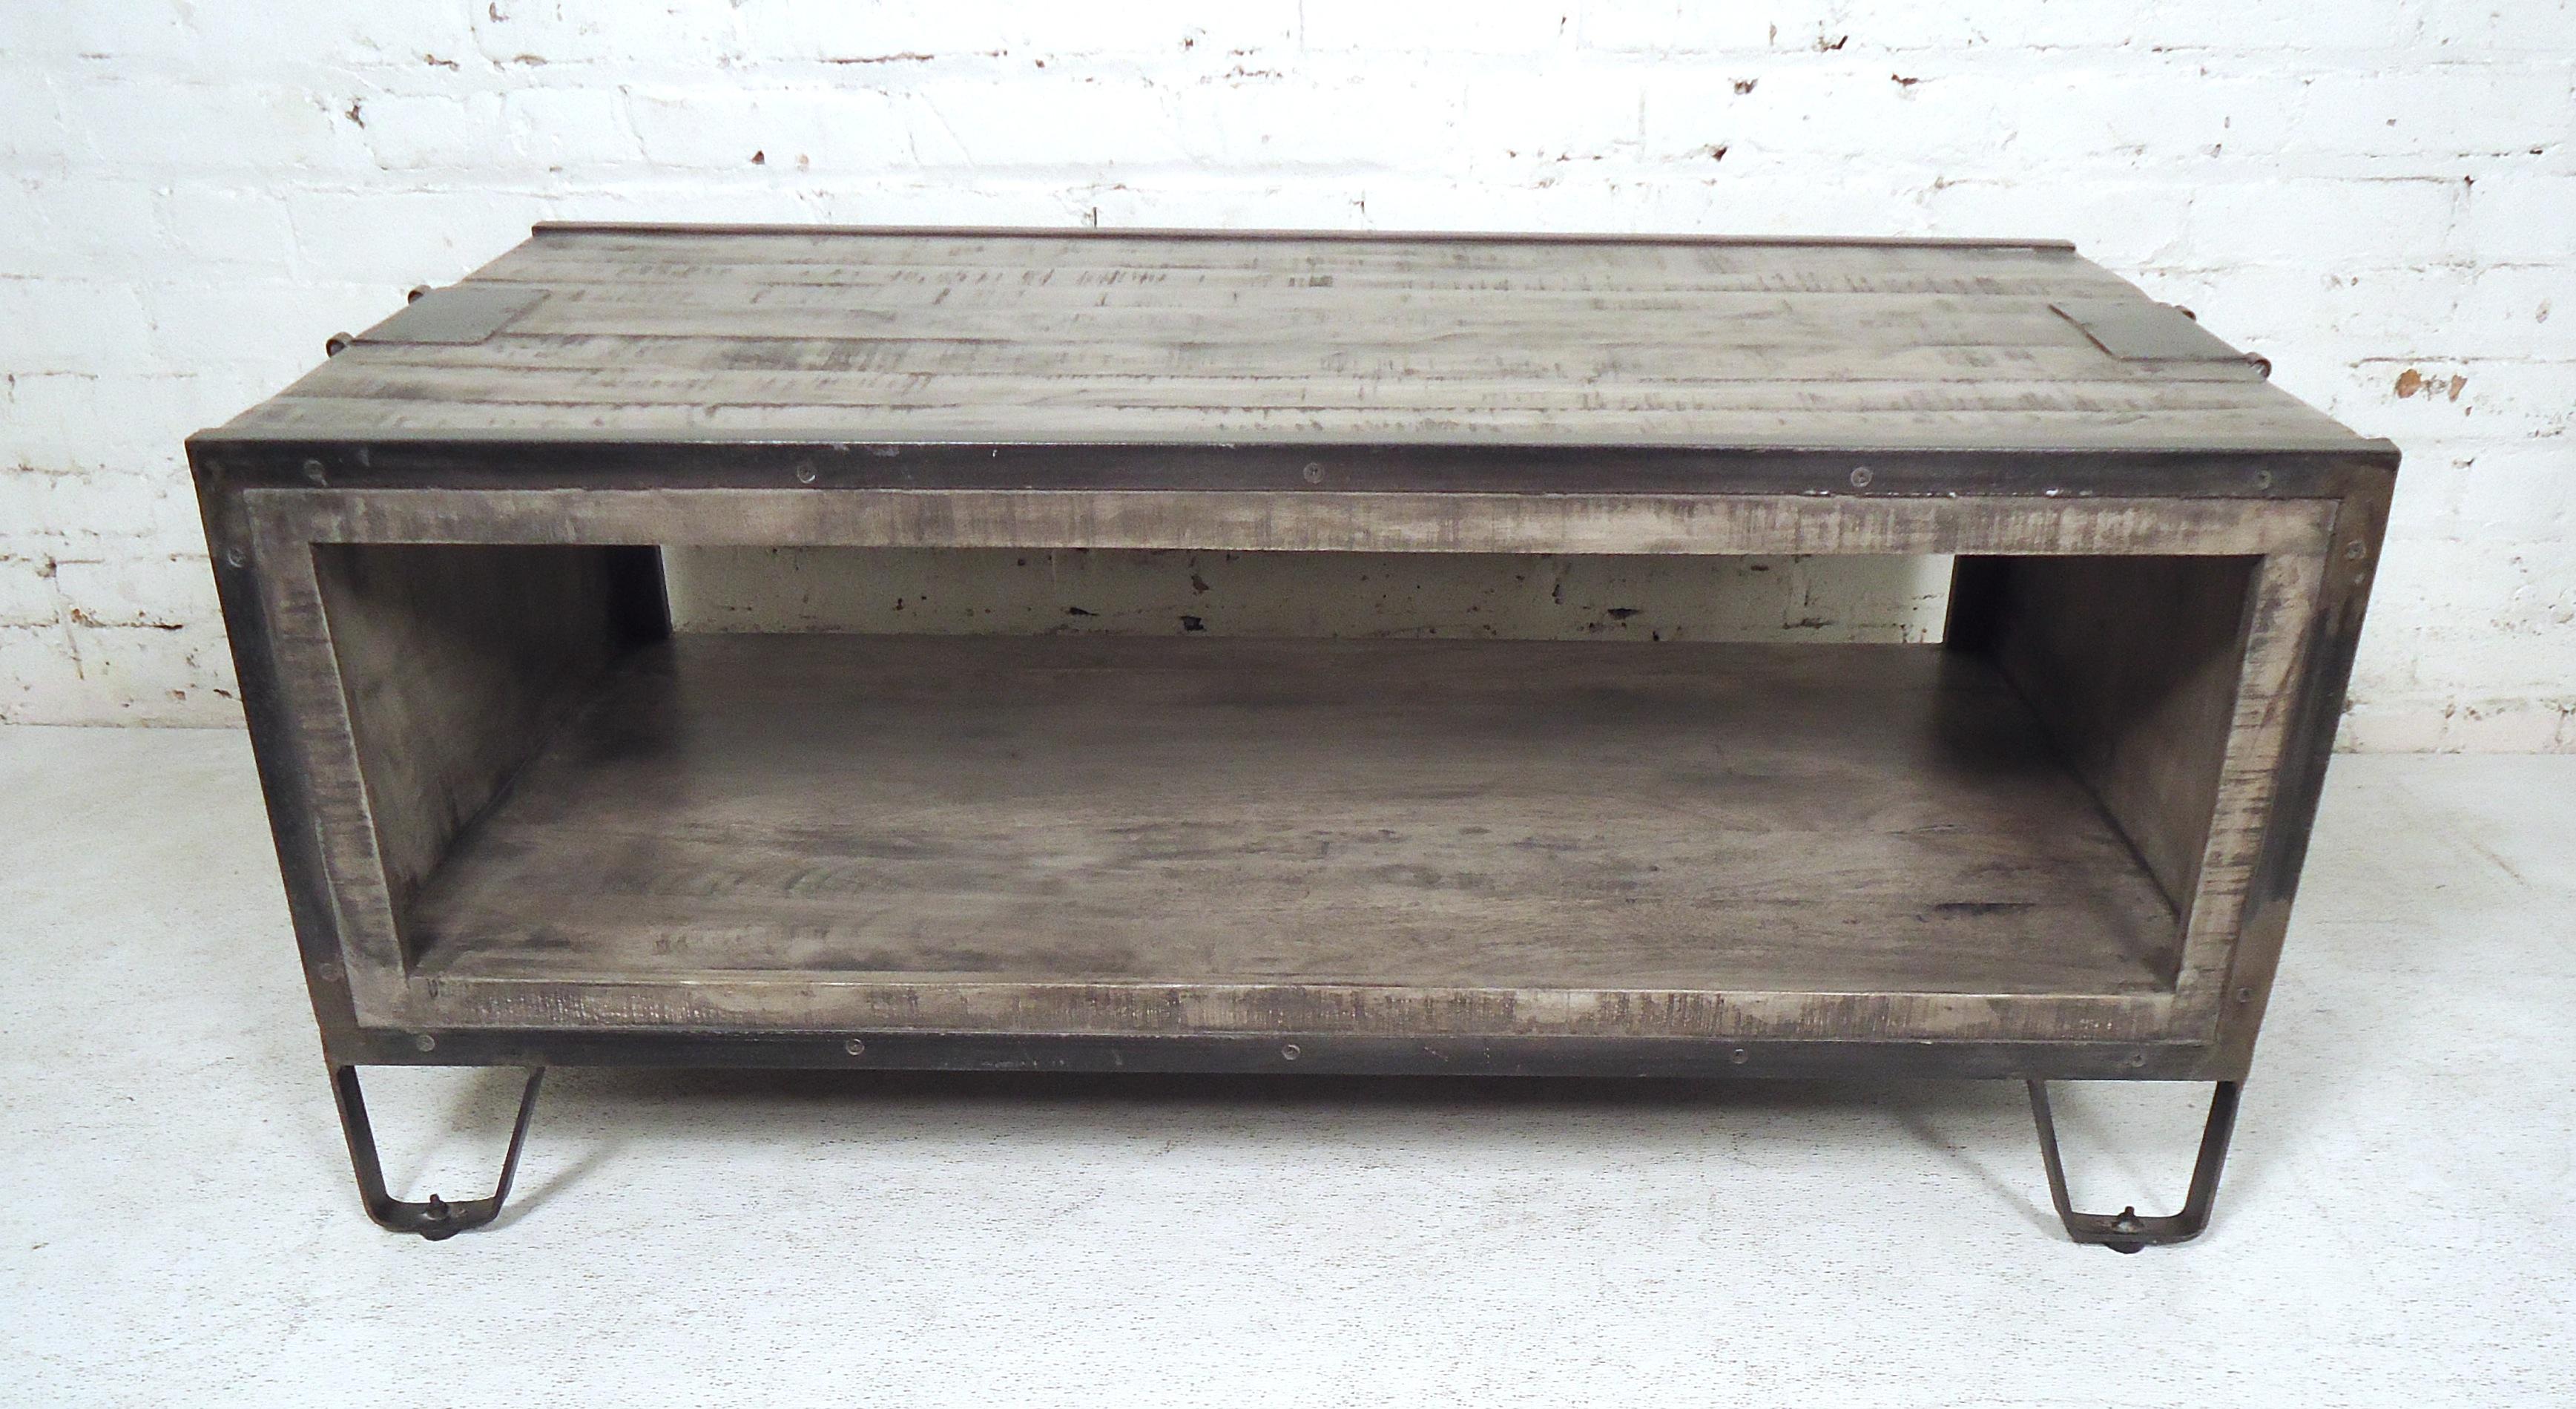 Machine aged style coffee table featuring a rustic wood design and industrial frame.

(Please confirm item location - NY or NJ - with dealer)
    